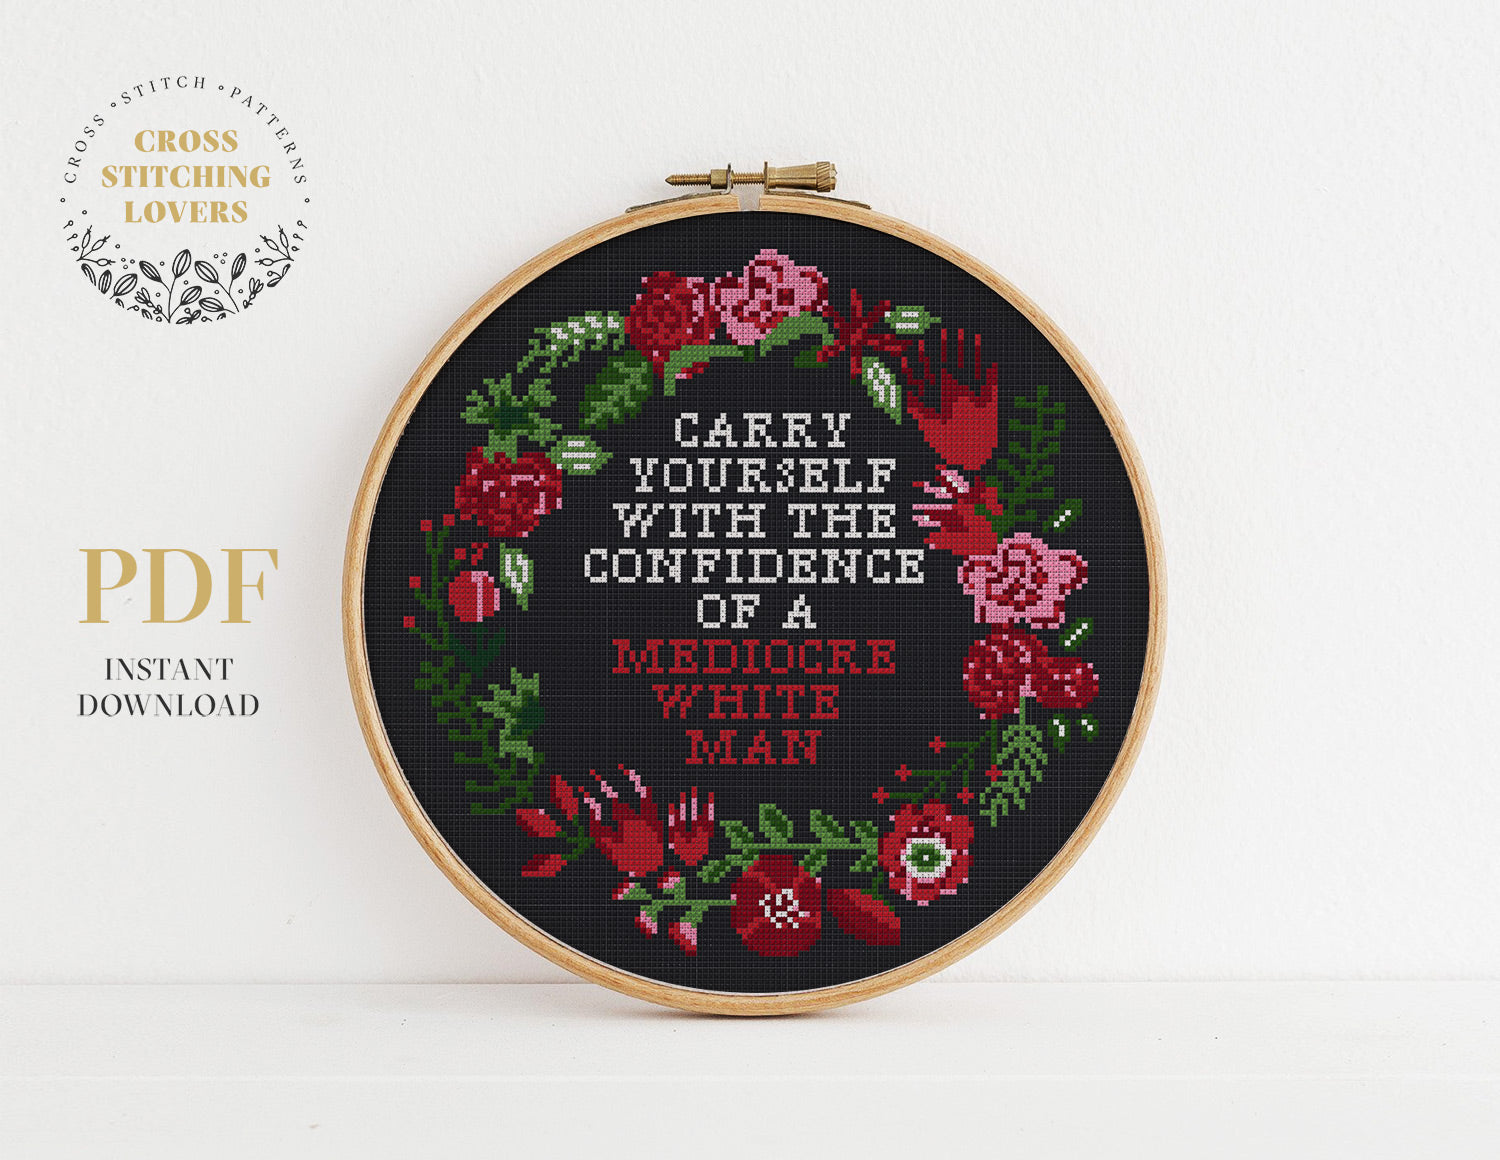 Carry Yourself With The Confidence Of A Mediocre White Man - Cross stitch pattern